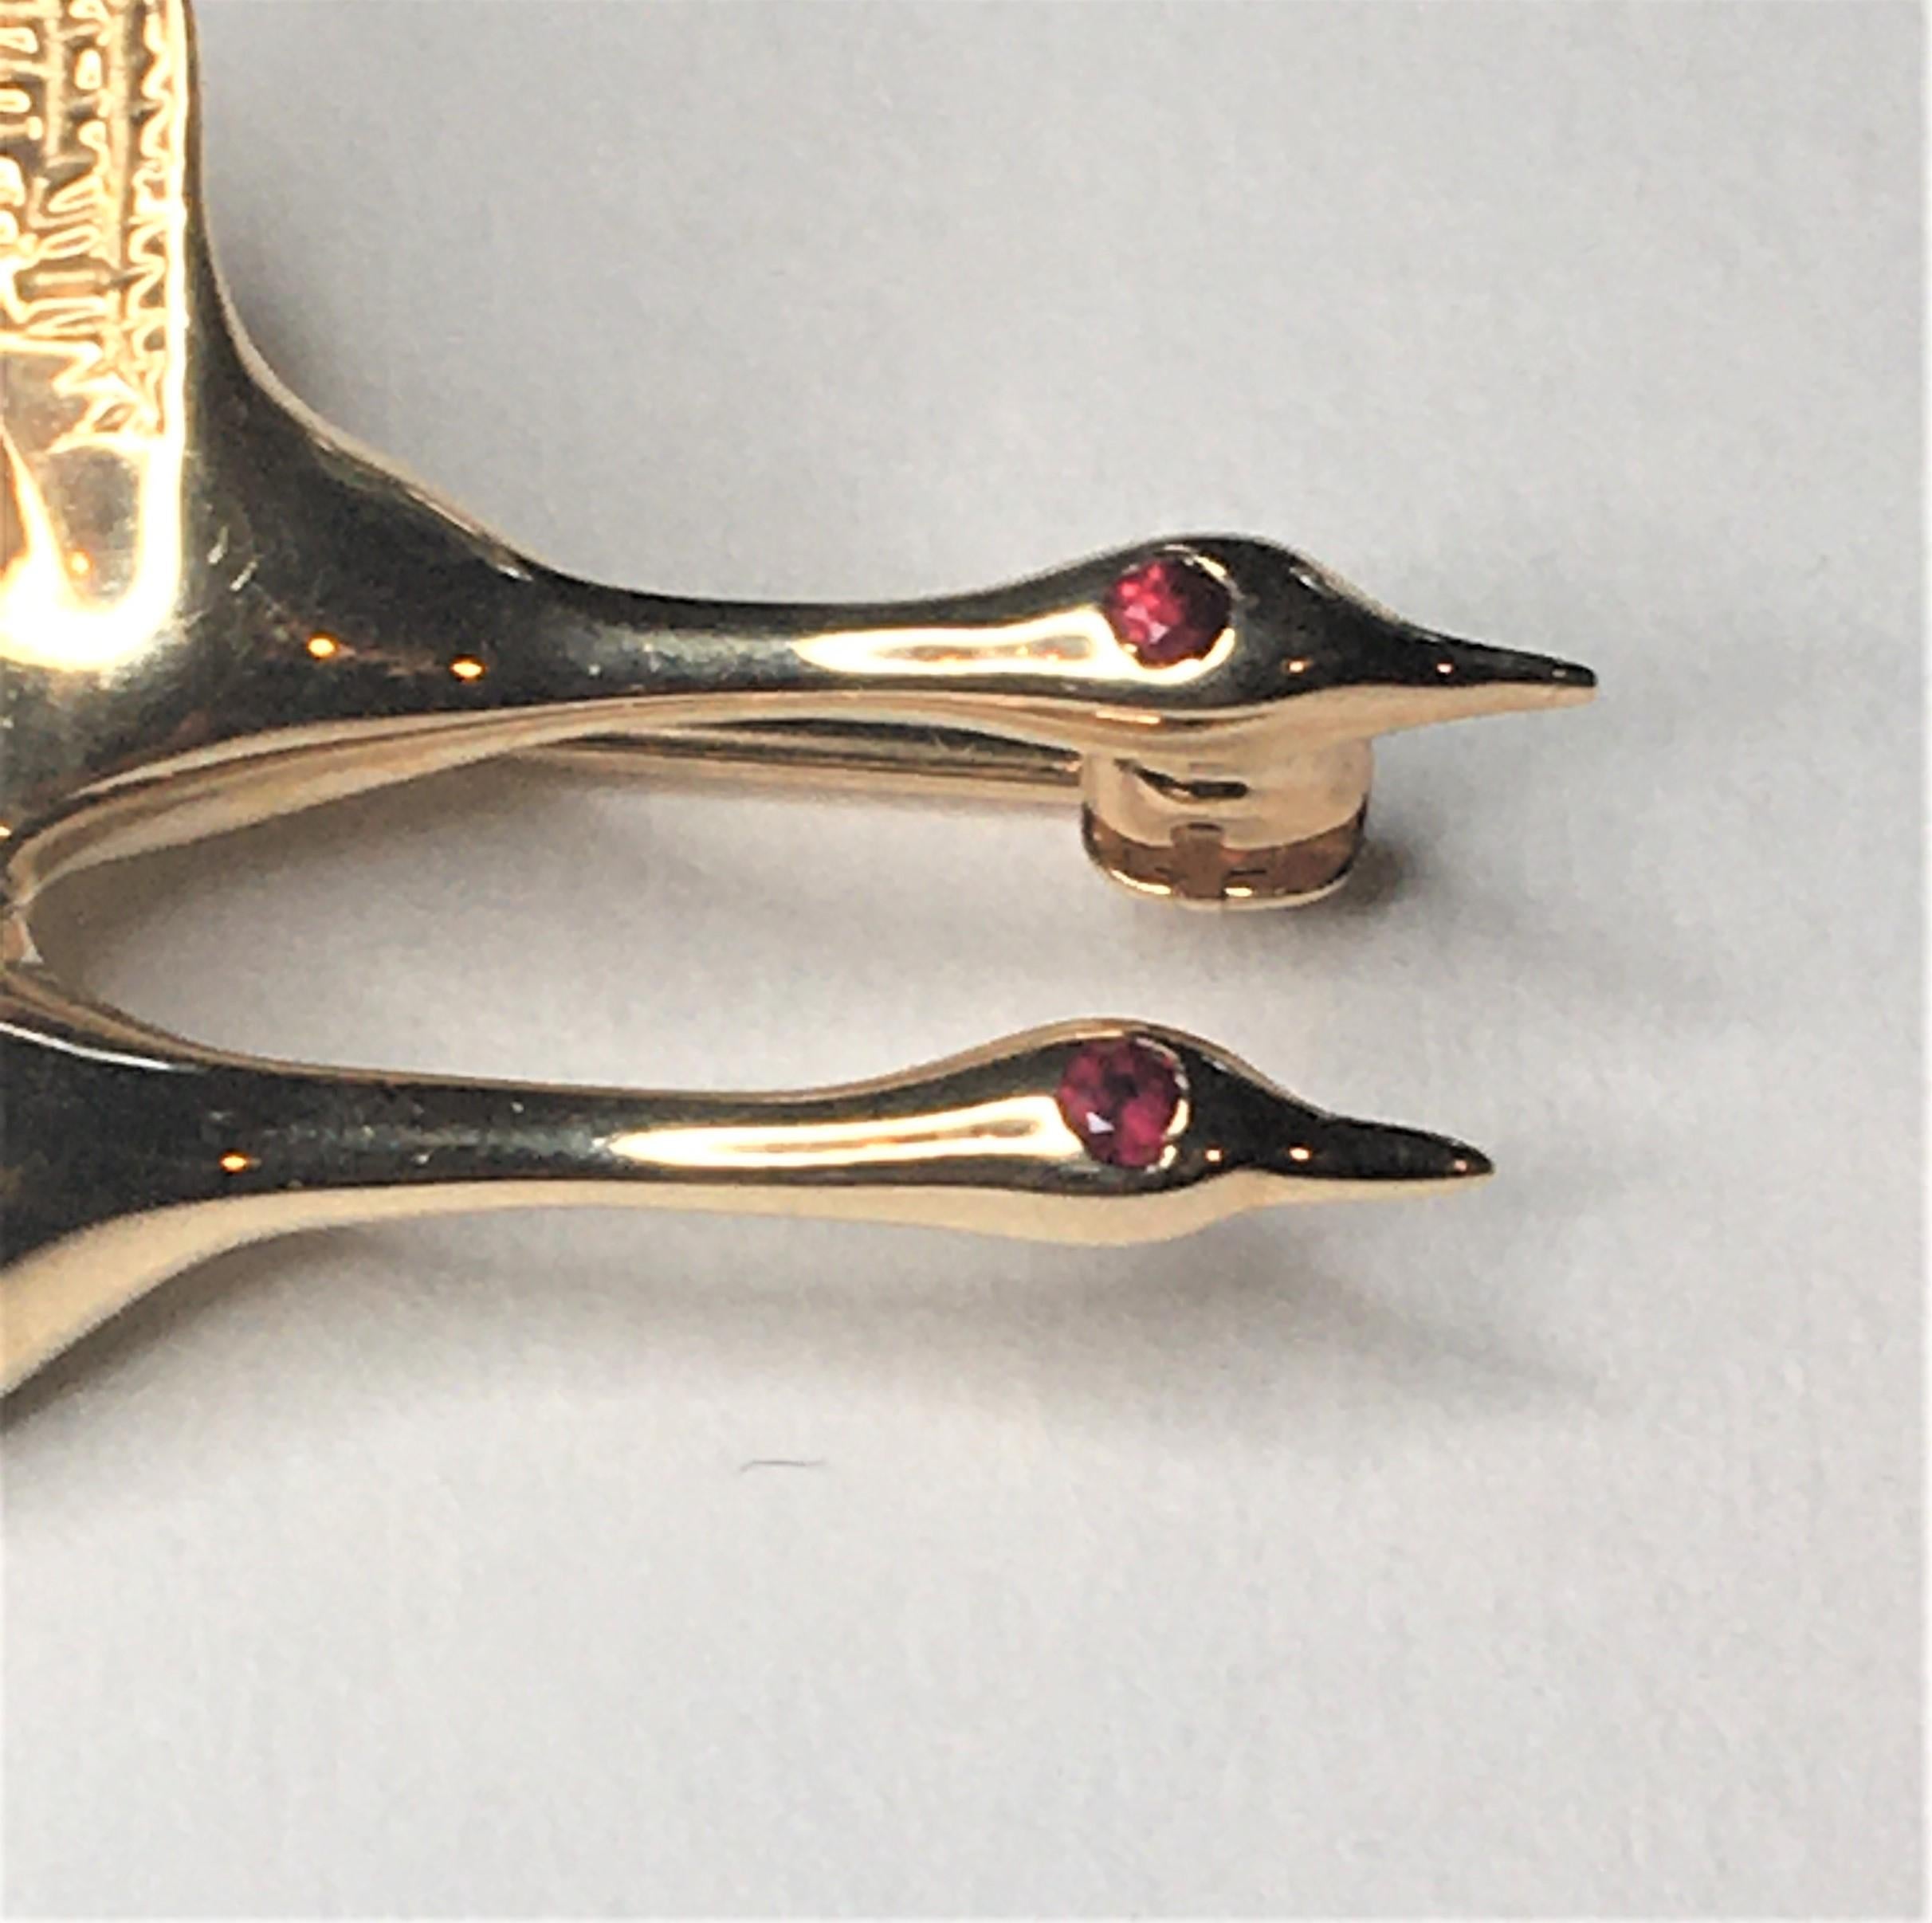 This small brooch would be a great addition to any coat, scarf or shirt!
Designer Robert Fisher & Co.
Two flying geese with wings high and necks reaching out.
14 karat yellow gold
Two round rubies for the 